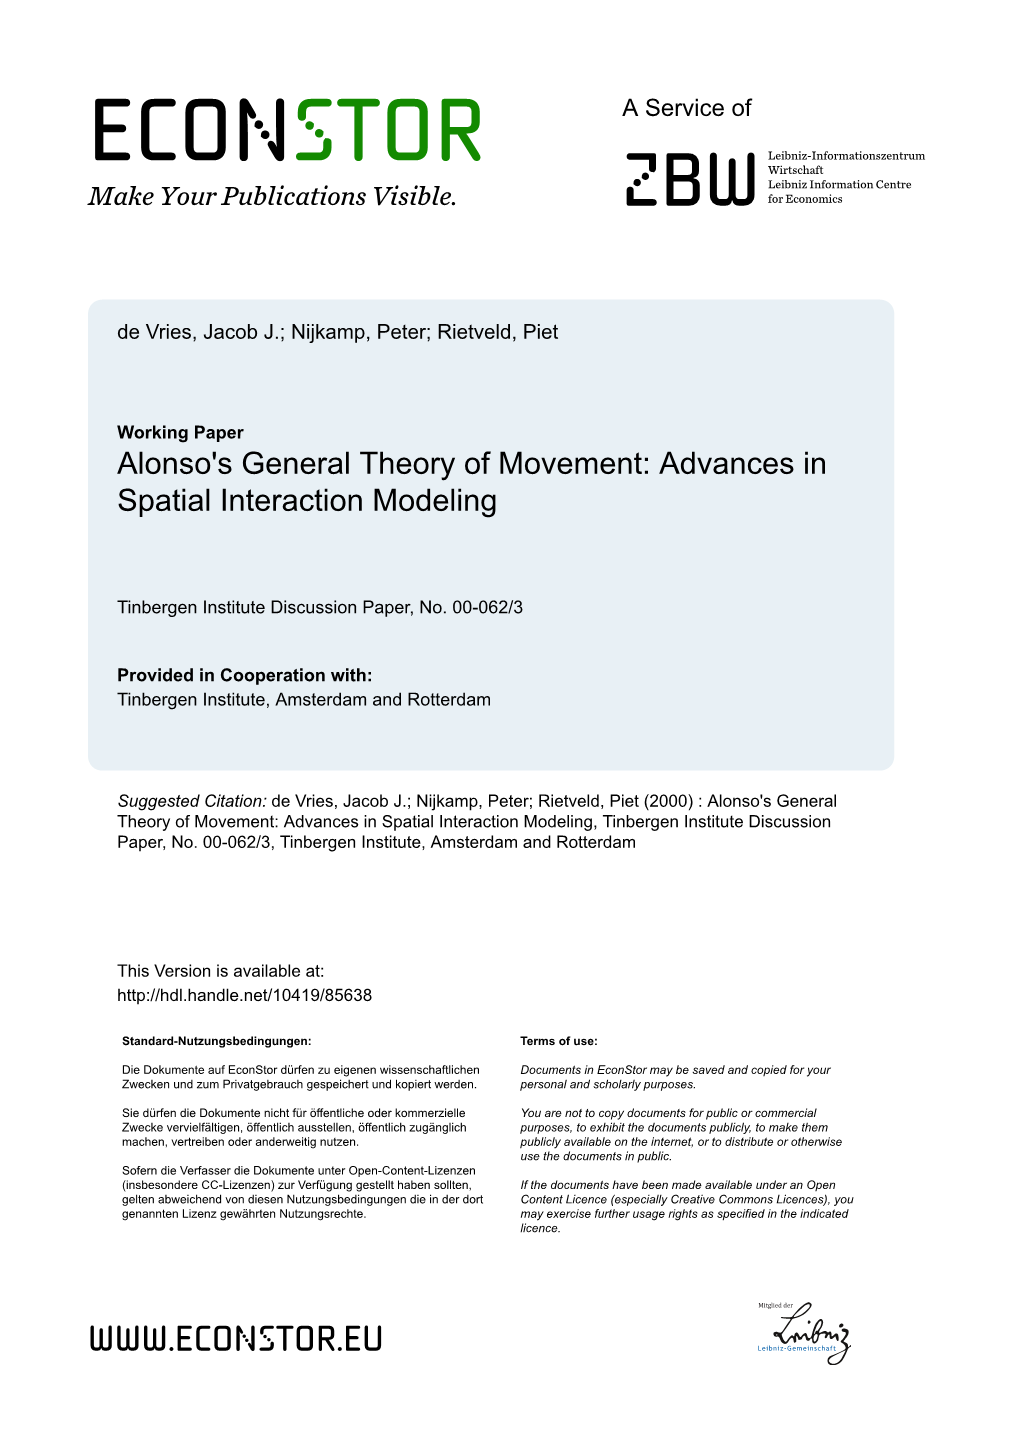 Alonso's General Theory of Movement: Advances in Spatial Interaction Modeling